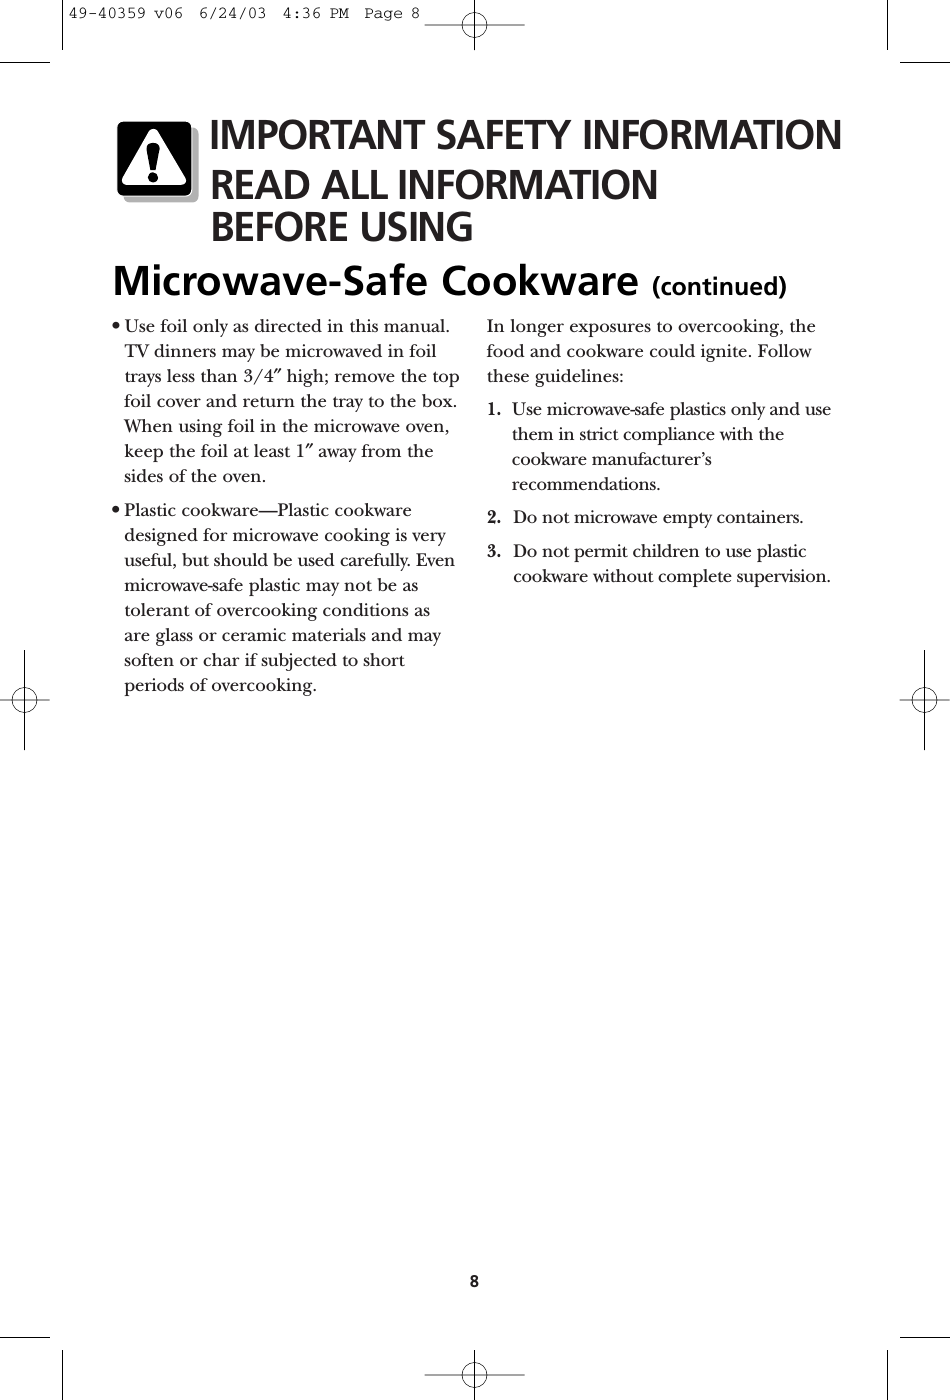 8•Use foil only as directed in this manual.TV dinners may be microwaved in foiltrays less than 3/4″high; remove the topfoil cover and return the tray to the box.When using foil in the microwave oven,keep the foil at least 1″away from thesides of the oven.•Plastic cookware—Plastic cookwaredesigned for microwave cooking is veryuseful, but should be used carefully. Evenmicrowave-safe plastic may not be astolerant of overcooking conditions as are glass or ceramic materials and maysoften or char if subjected to shortperiods of overcooking. In longer exposures to overcooking, thefood and cookware could ignite. Followthese guidelines: 1. Use microwave-safe plastics only and use them in strict compliance with thecookware manufacturer’srecommendations. 2. Do not microwave empty containers. 3. Do not permit children to use plasticcookware without complete supervision.IMPORTANT SAFETY INFORMATIONREAD ALL INFORMATIONBEFORE USINGMicrowave-Safe Cookware (continued)49-40359 v06  6/24/03  4:36 PM  Page 8